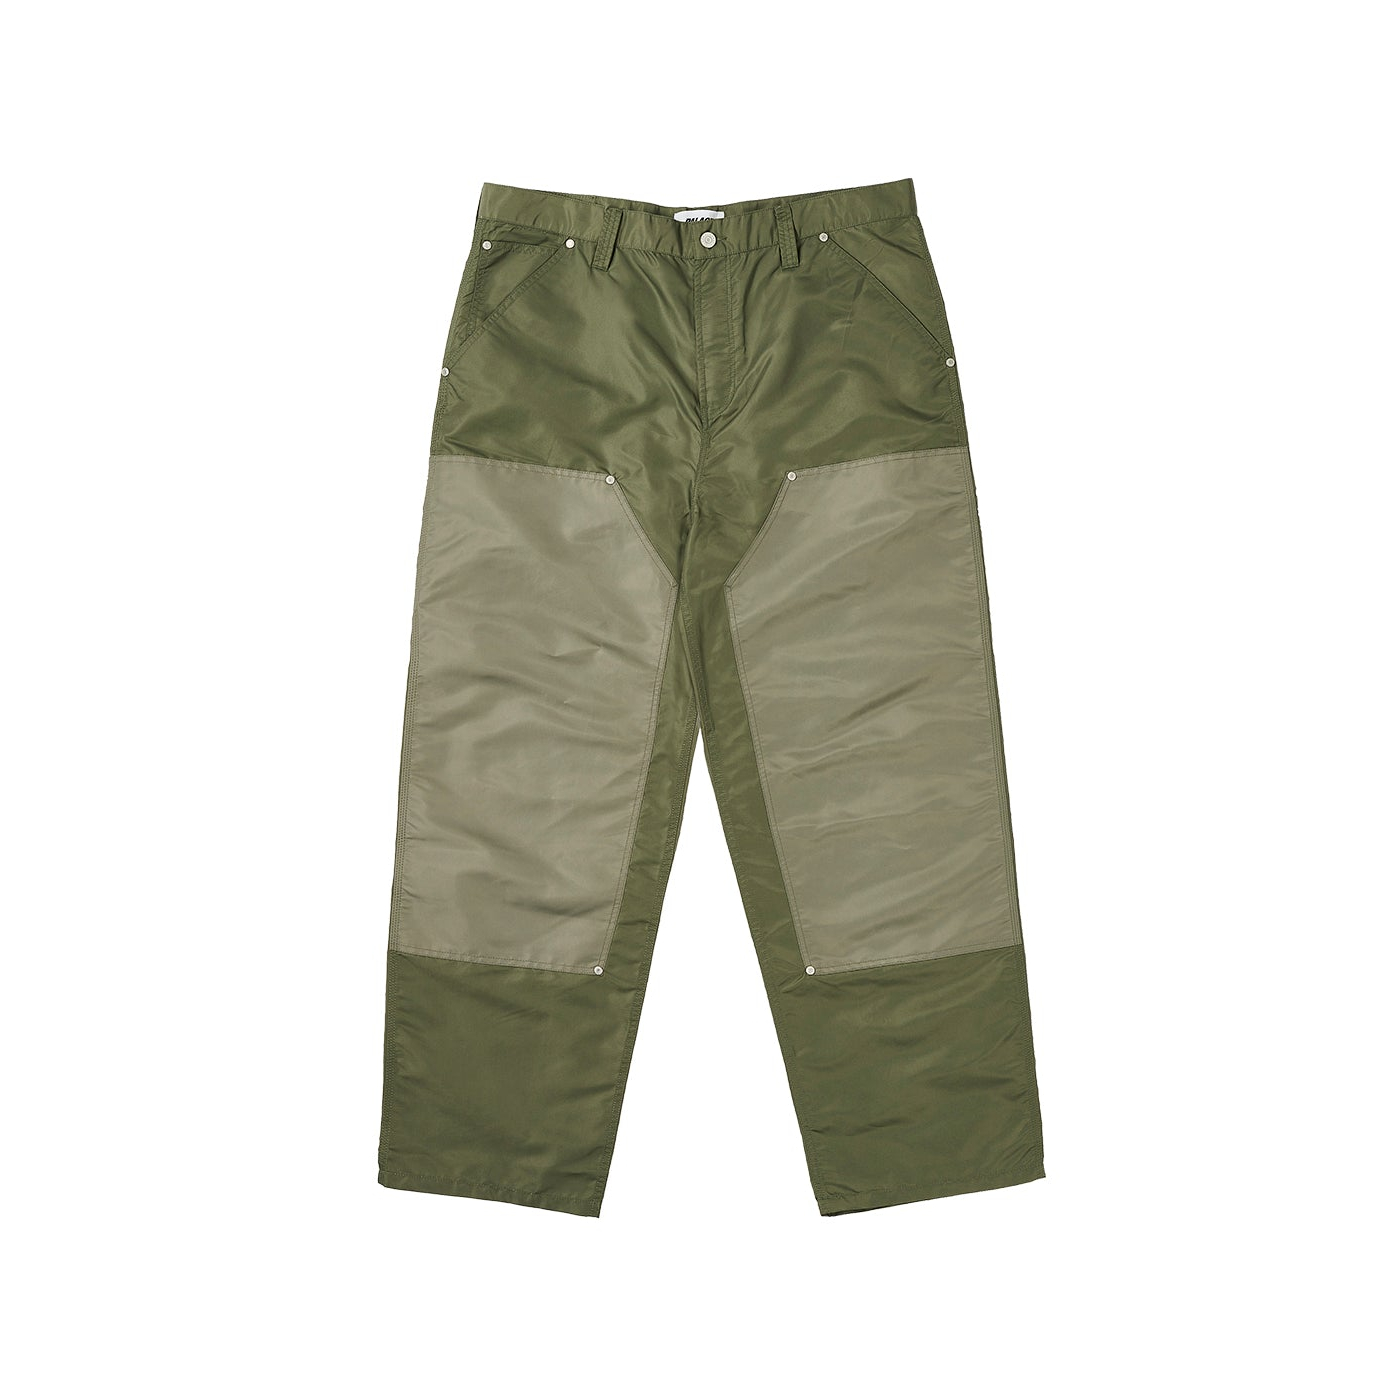 Thumbnail RODEO NYLON TROUSER THE DEEP GREEN one color